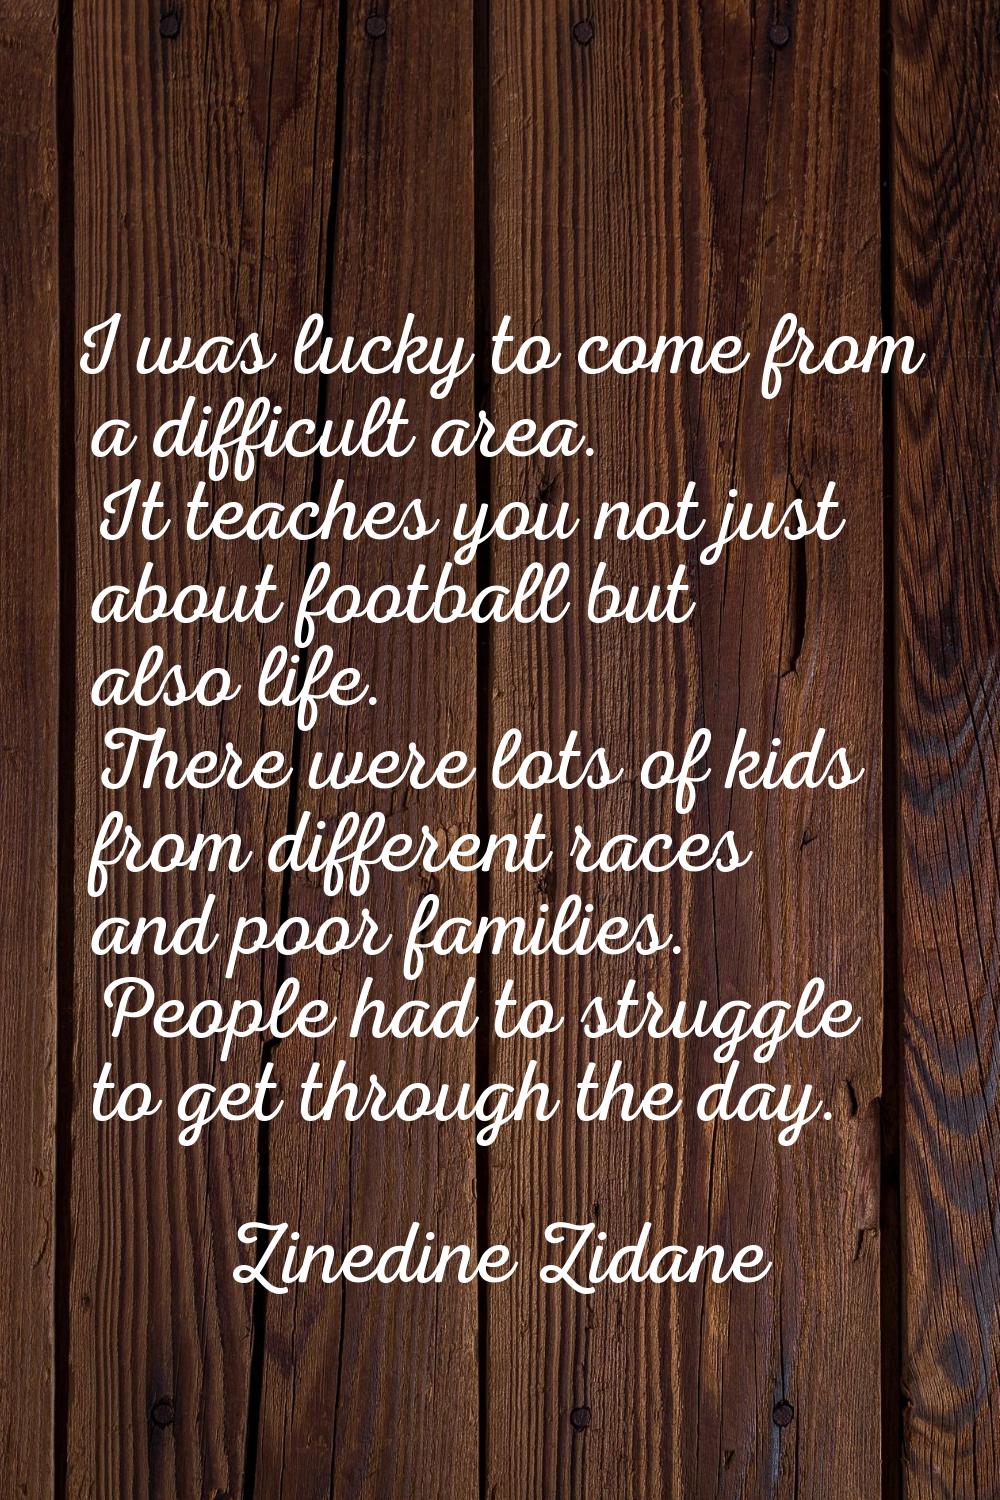 I was lucky to come from a difficult area. It teaches you not just about football but also life. Th